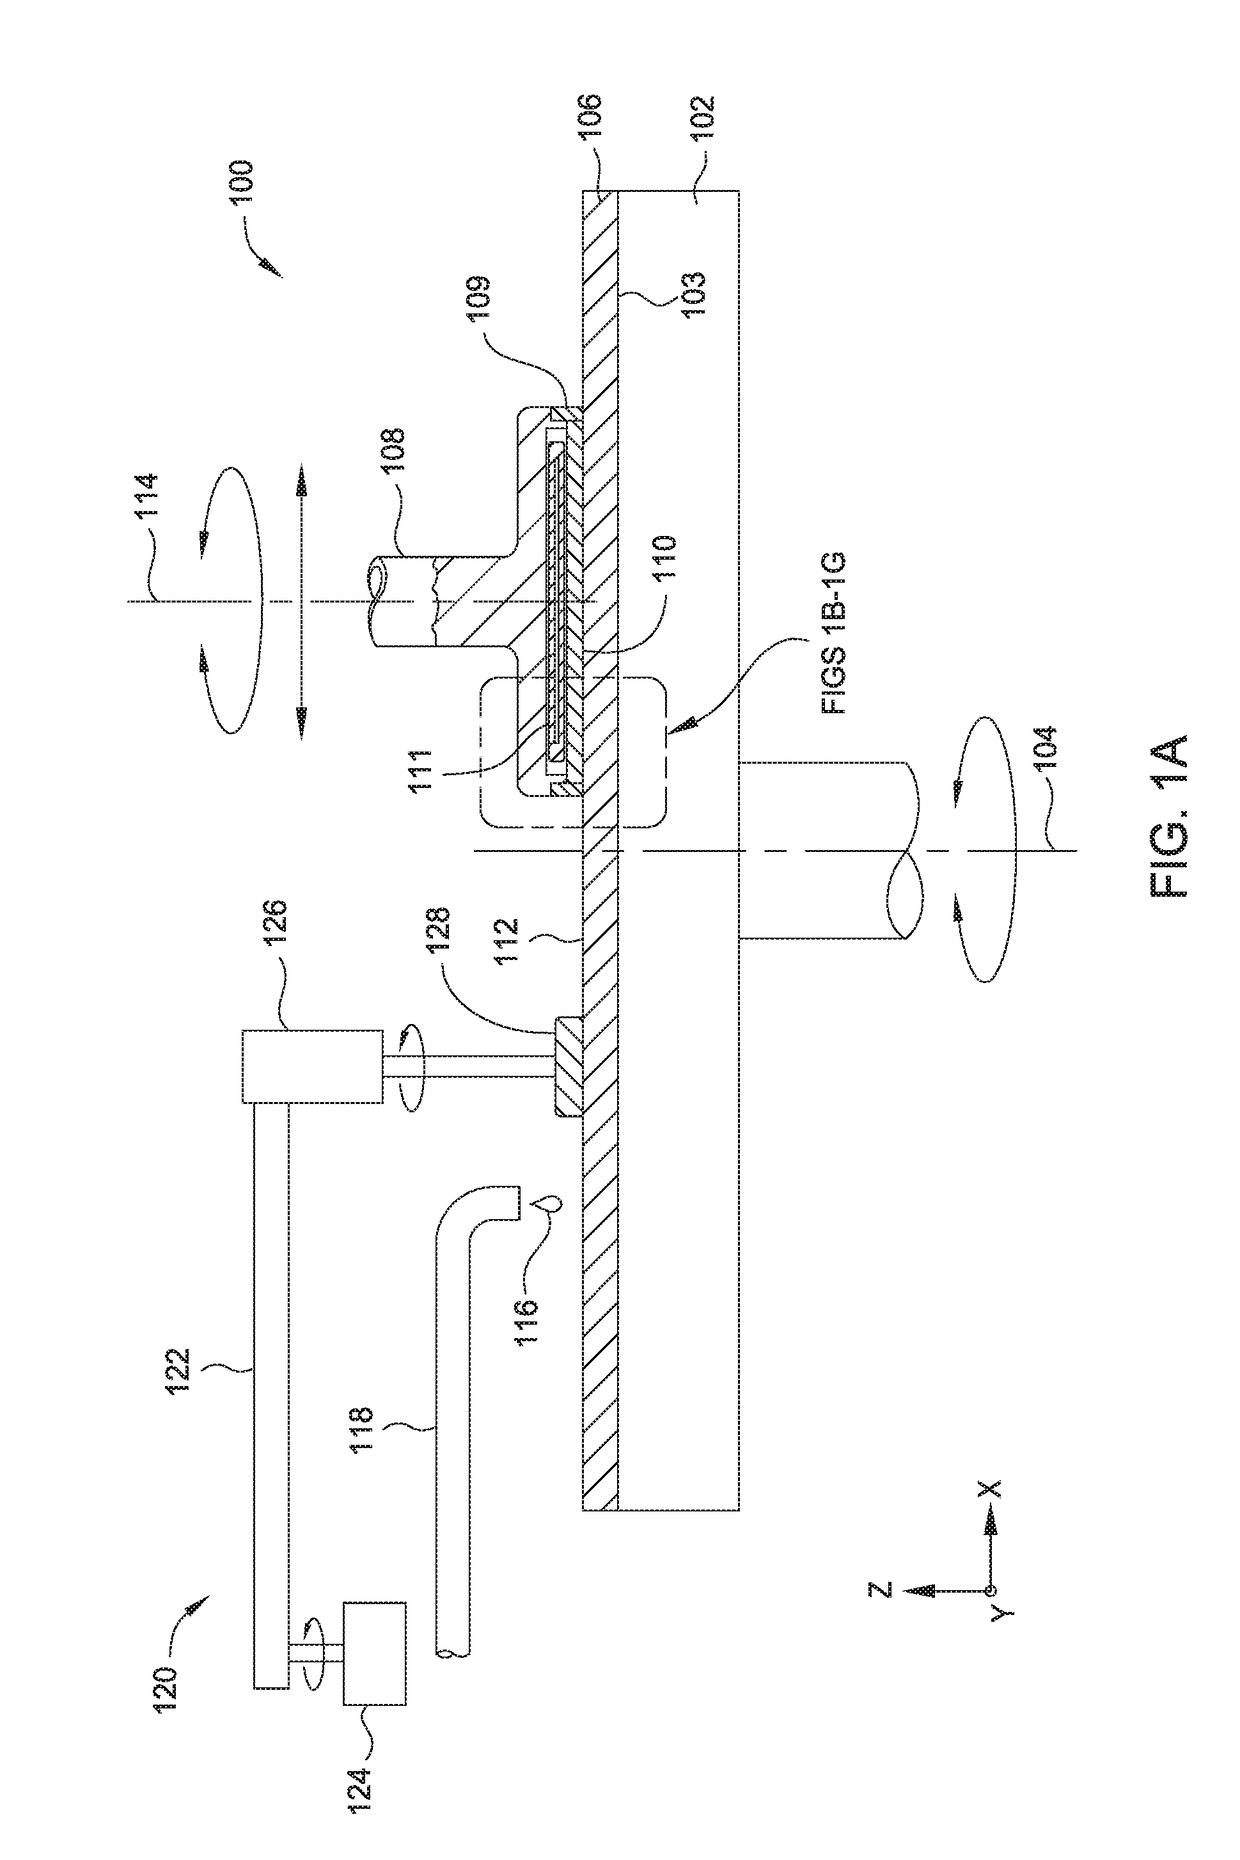 Apparatus and method of forming a polishing pads by use of an additive manufacturing process